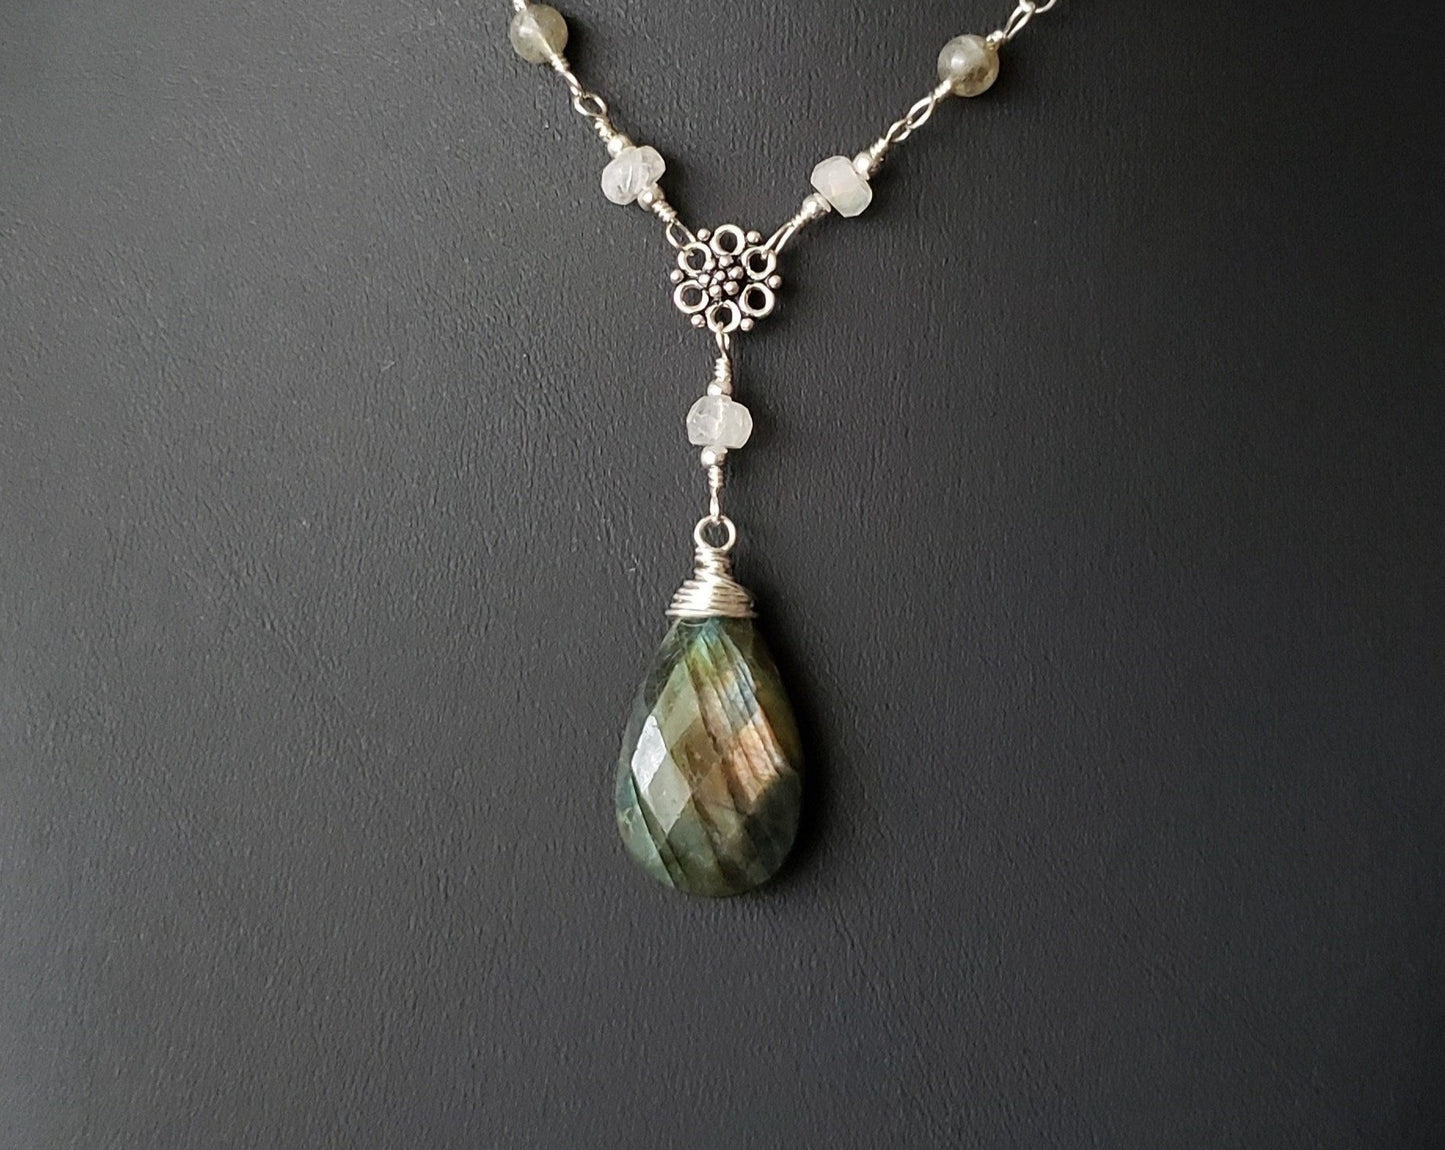 Art Deco Inspired Moonstone and Labradorite Necklace